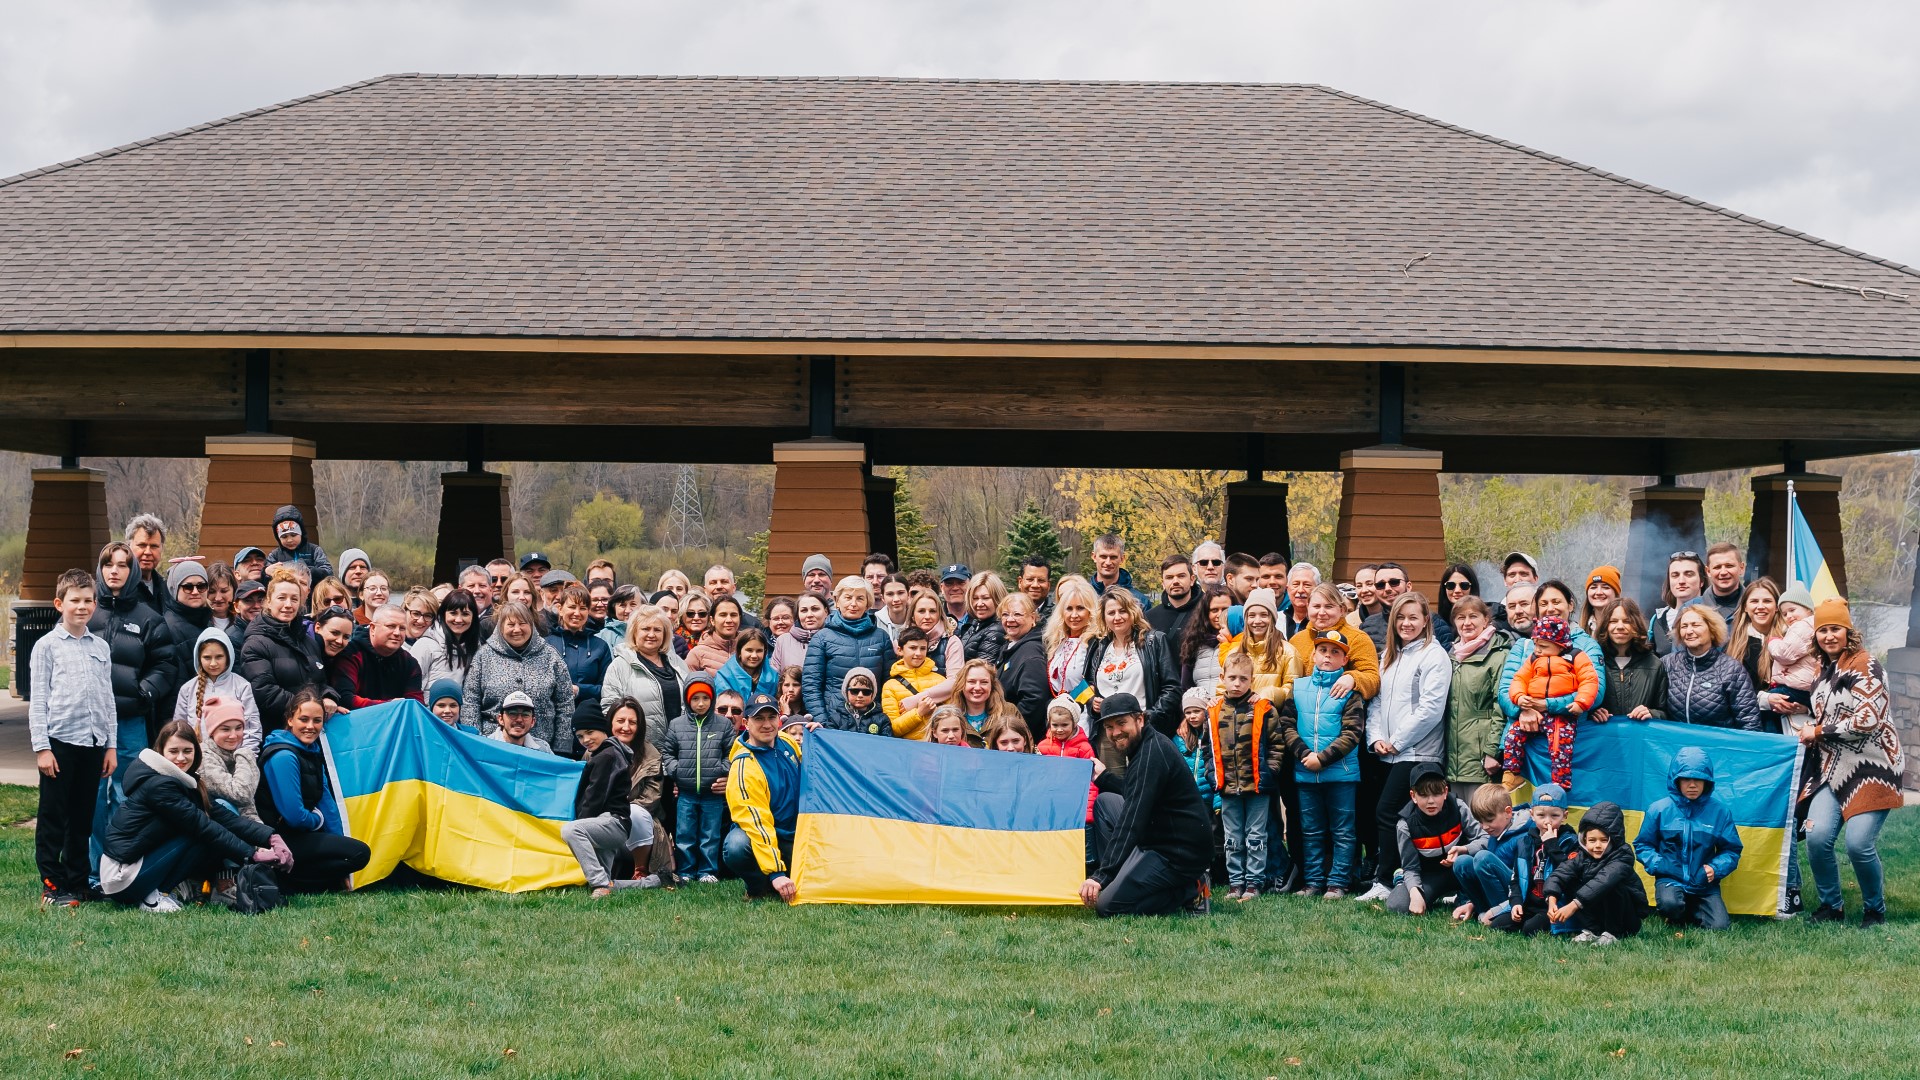 According to the latest U.S. Census data, there are about 5,000 Ukrainians in West Michigan and this partnership will help foster that relationship even further.